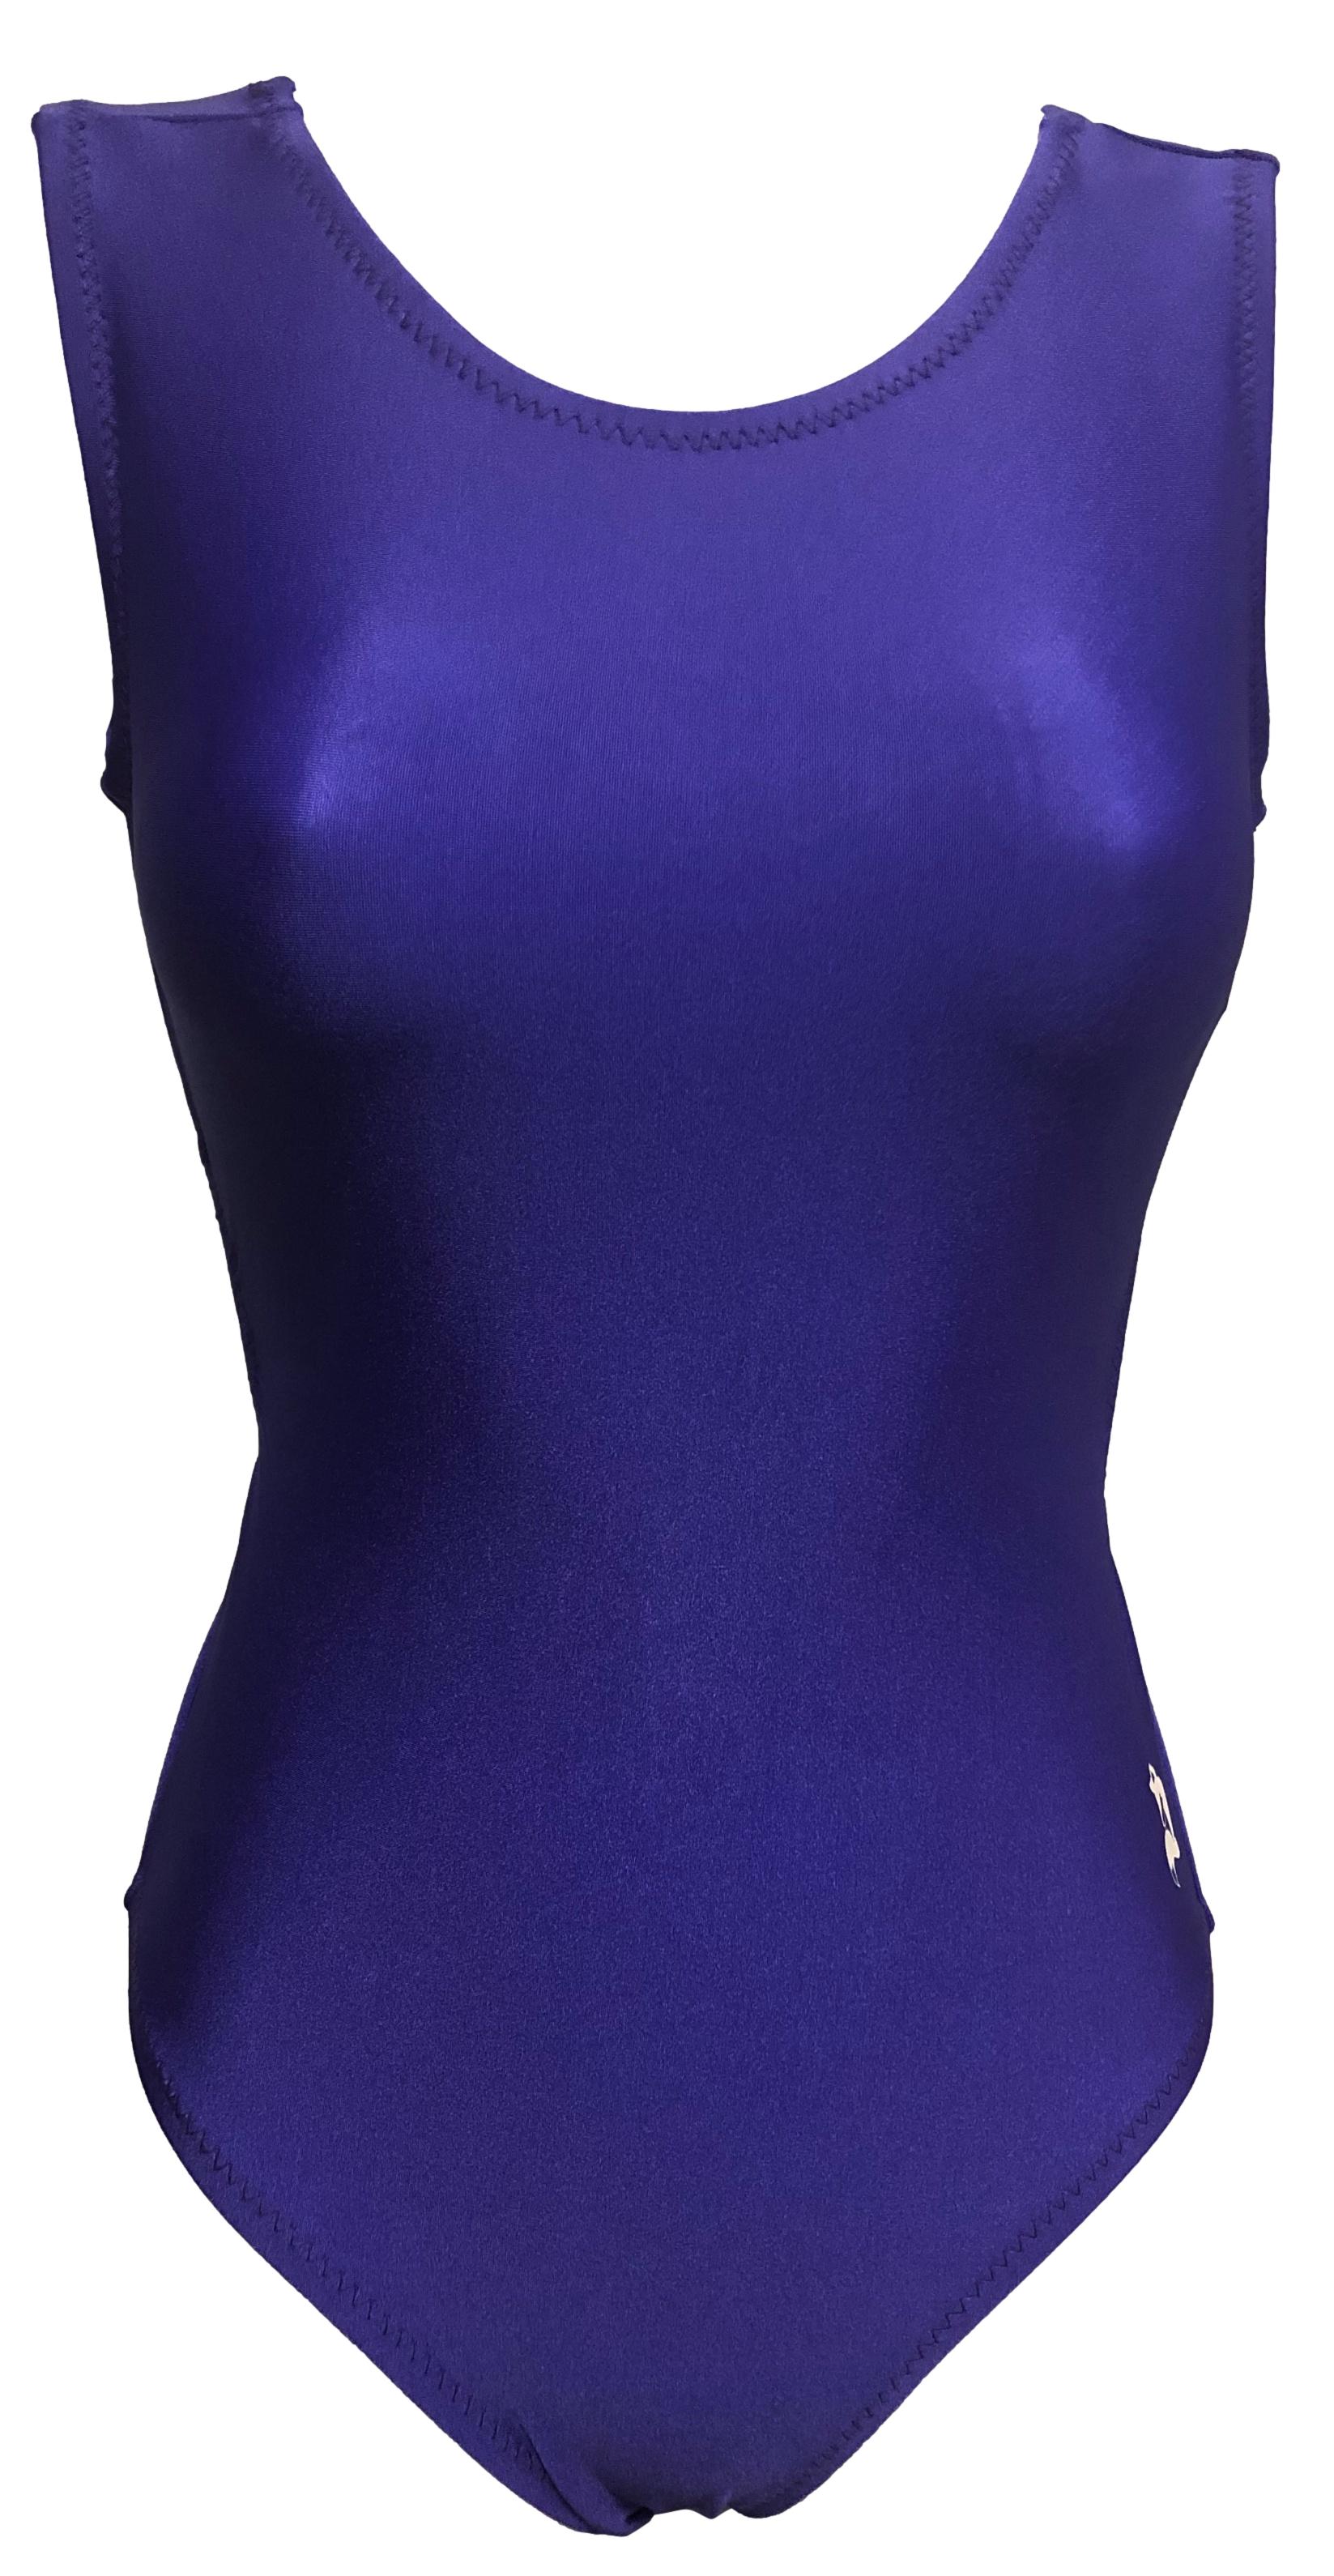 solid purple leotards for gilrs 